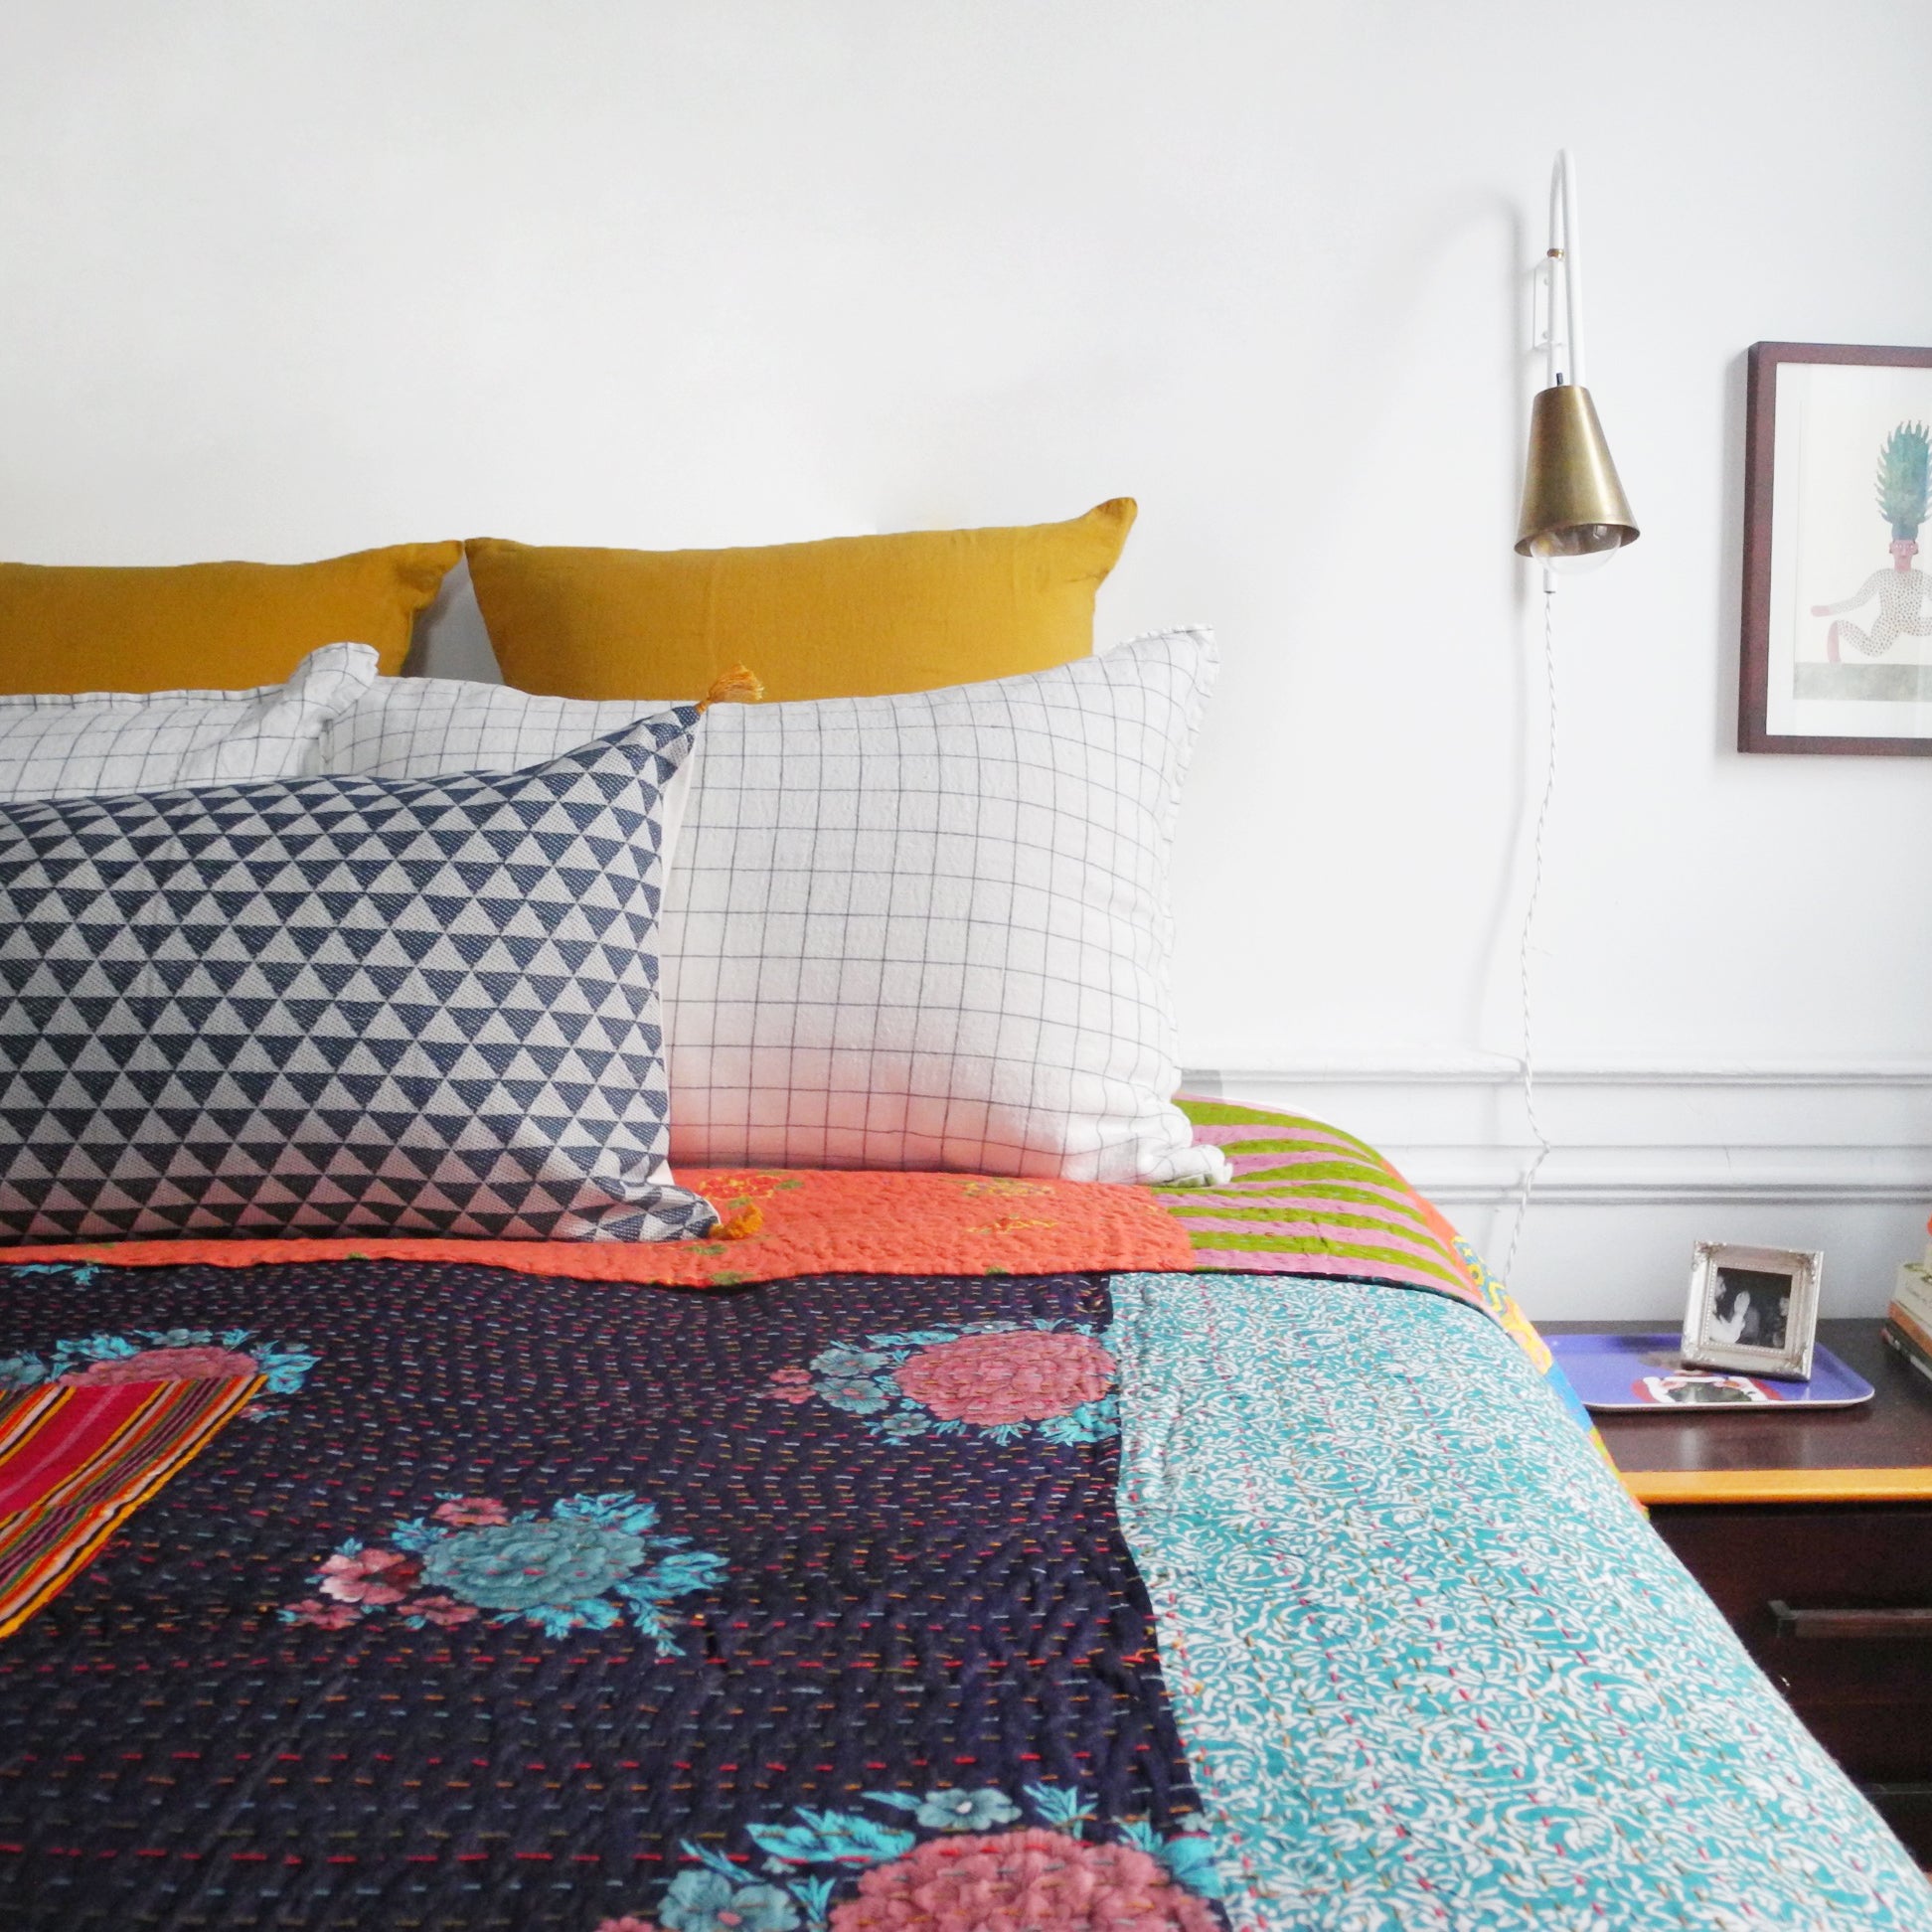 Linge Particulier Honey Yellow Euro Linen Pillowcase Sham with a Lisa Corti Gudri Kantha quilt for a colorful linen bedding look in mustard yellow - Collyer&#39;s Mansion